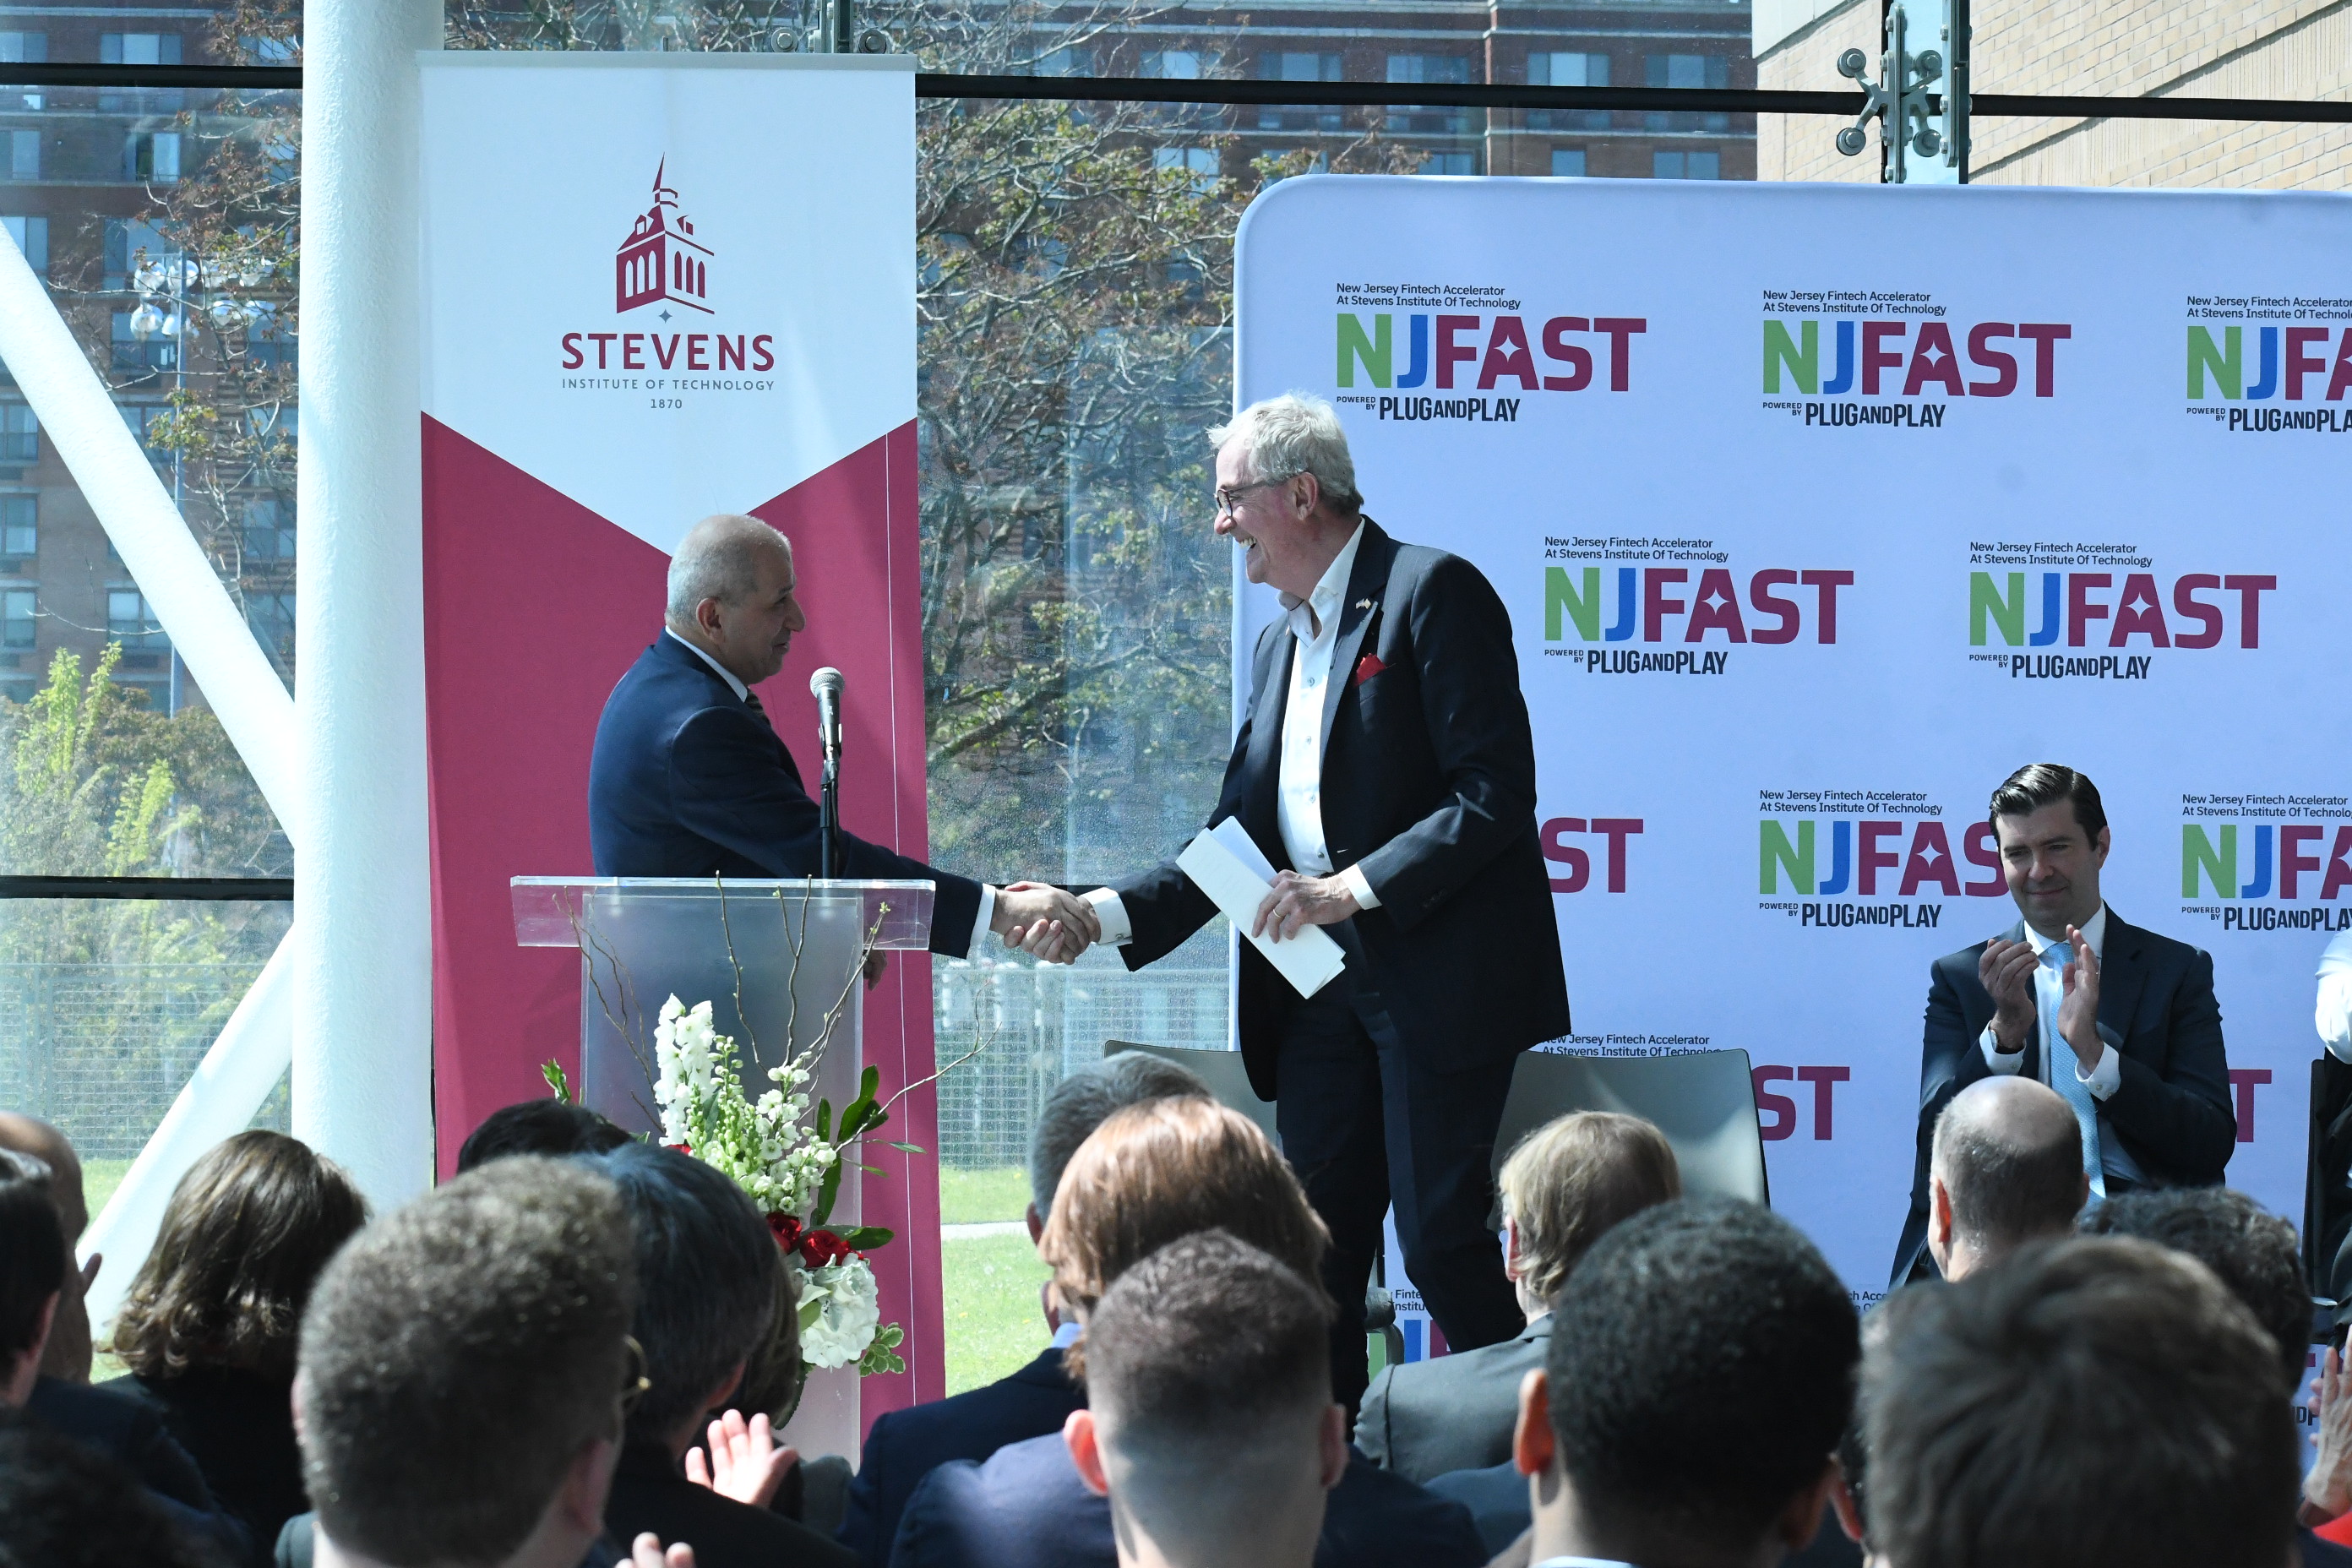 Gov. Phil Murphy, New Jersey Economic Development Authority Executive Director Tim Sullivan and other officials announce the launch of the New Jersey Fintech Accelerator at Stevens Institute of Technology (NJ FAST), which will serve as a hub for financial technology and insurance technology startups. Stevens President Nariman Farvardin is seen shaking hands with Murphy.